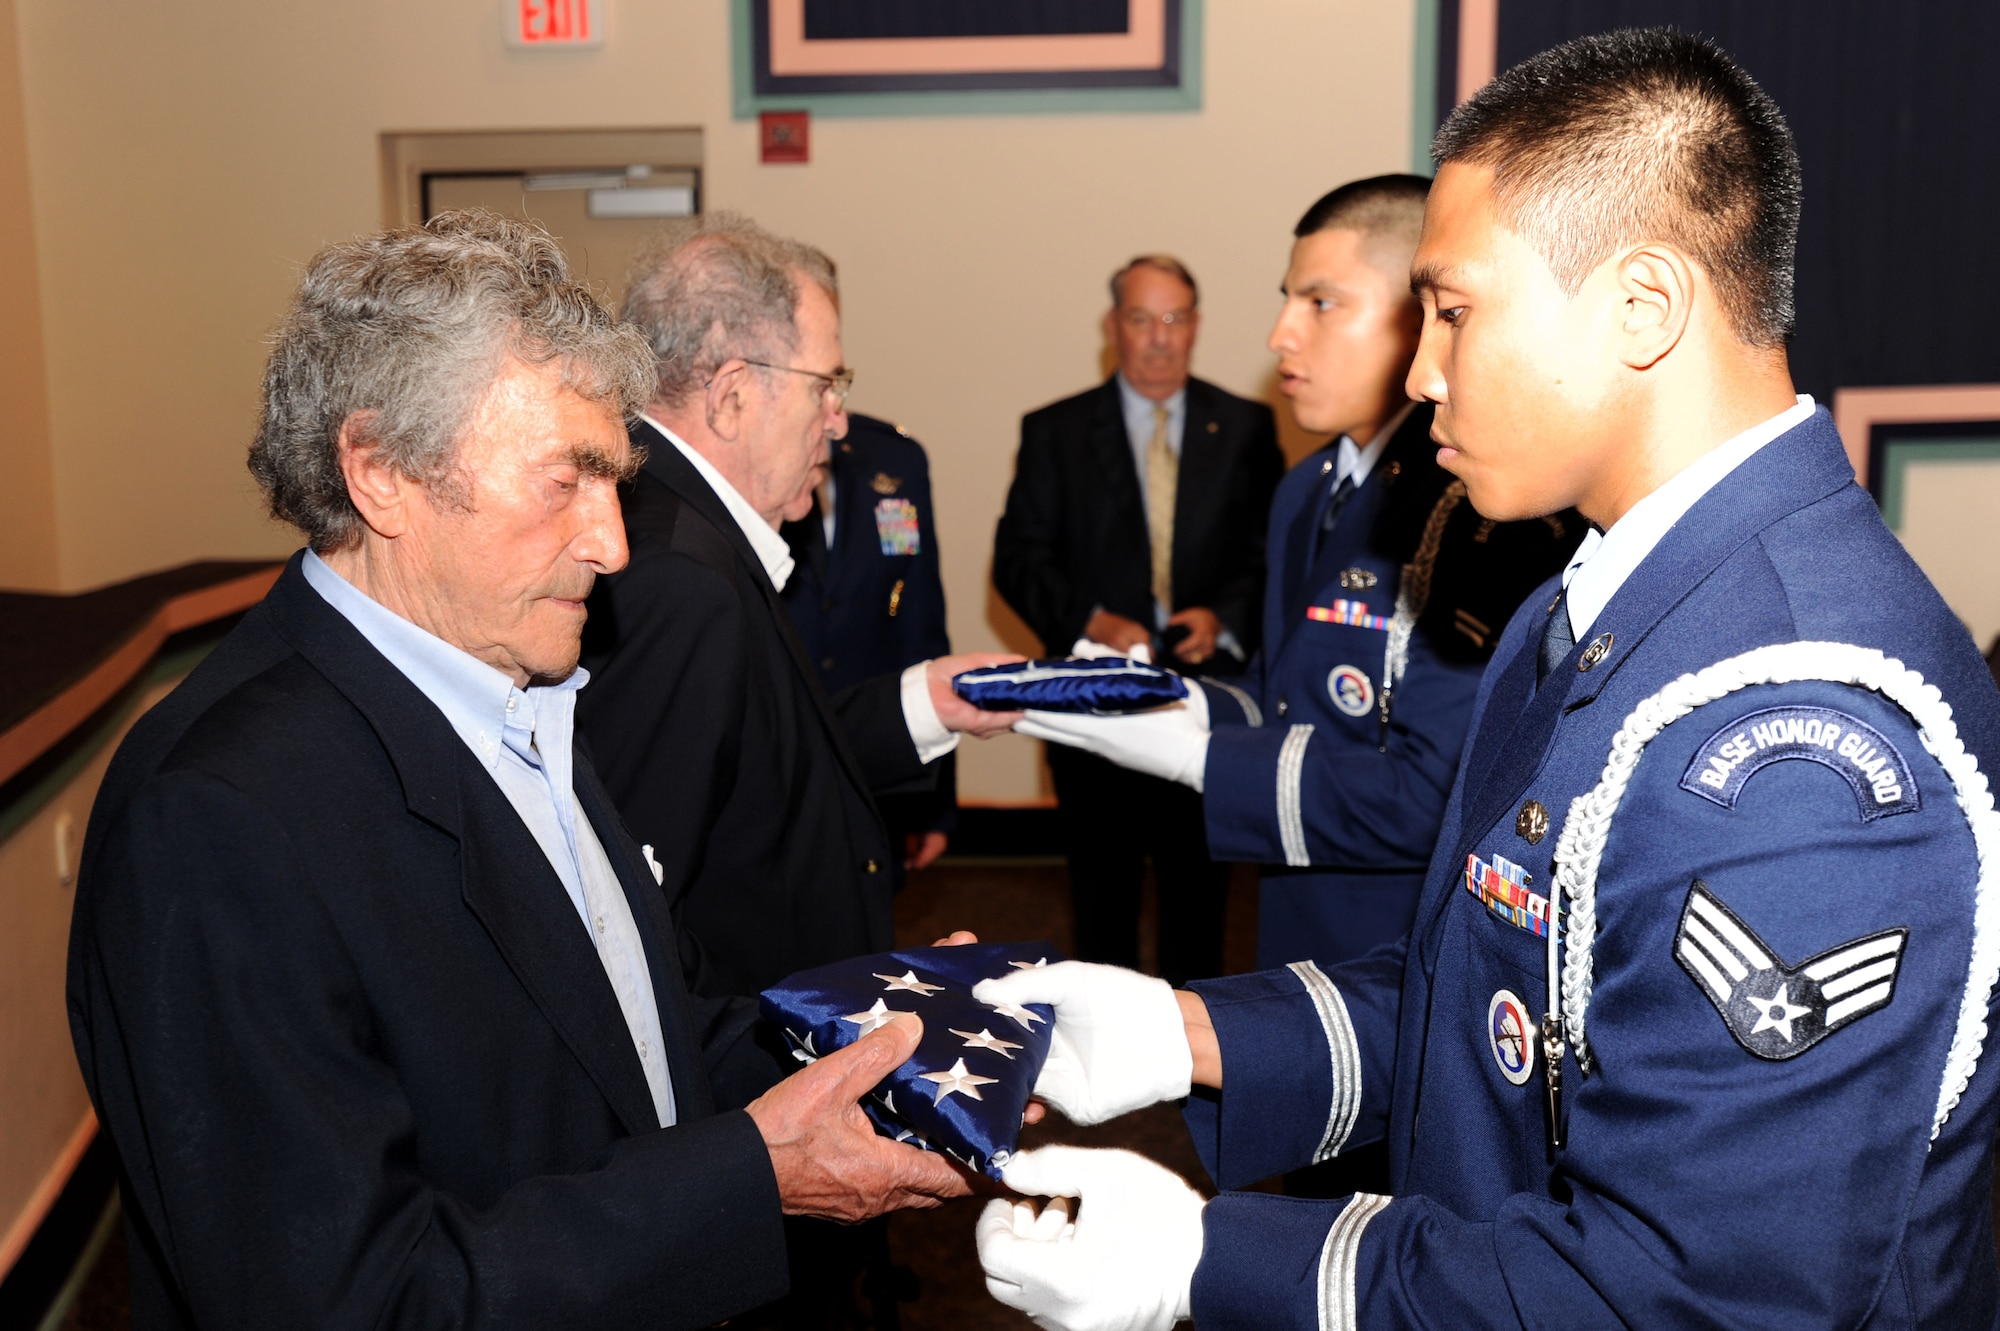 Holocaust survivors Herman Snyder (foreground) and Dr. Victor Sapio receive flags, flown over our Nation's Capitol from Hurlburt Field Honor Guard Members Senior Airman Ephraim Gill (foreground) and Airman 1st Class Gabriel Pillcurima. Congressman Jeff Miller provided the flags and certificates of appreciation for Hurlburt Field's Annual Holocaust Remembrance Ceremony May 4. Helen Hunt Rigdon represented the Congressman during the ceremony. The event was hosted by the 505th CCW on behalf of the 1st Special Operations Wing. The theme of this year's observance is "Stories of Freedom: What You Do Matters." (U.S. Air Force Photo by Senior Airman Matthew R. Loken)